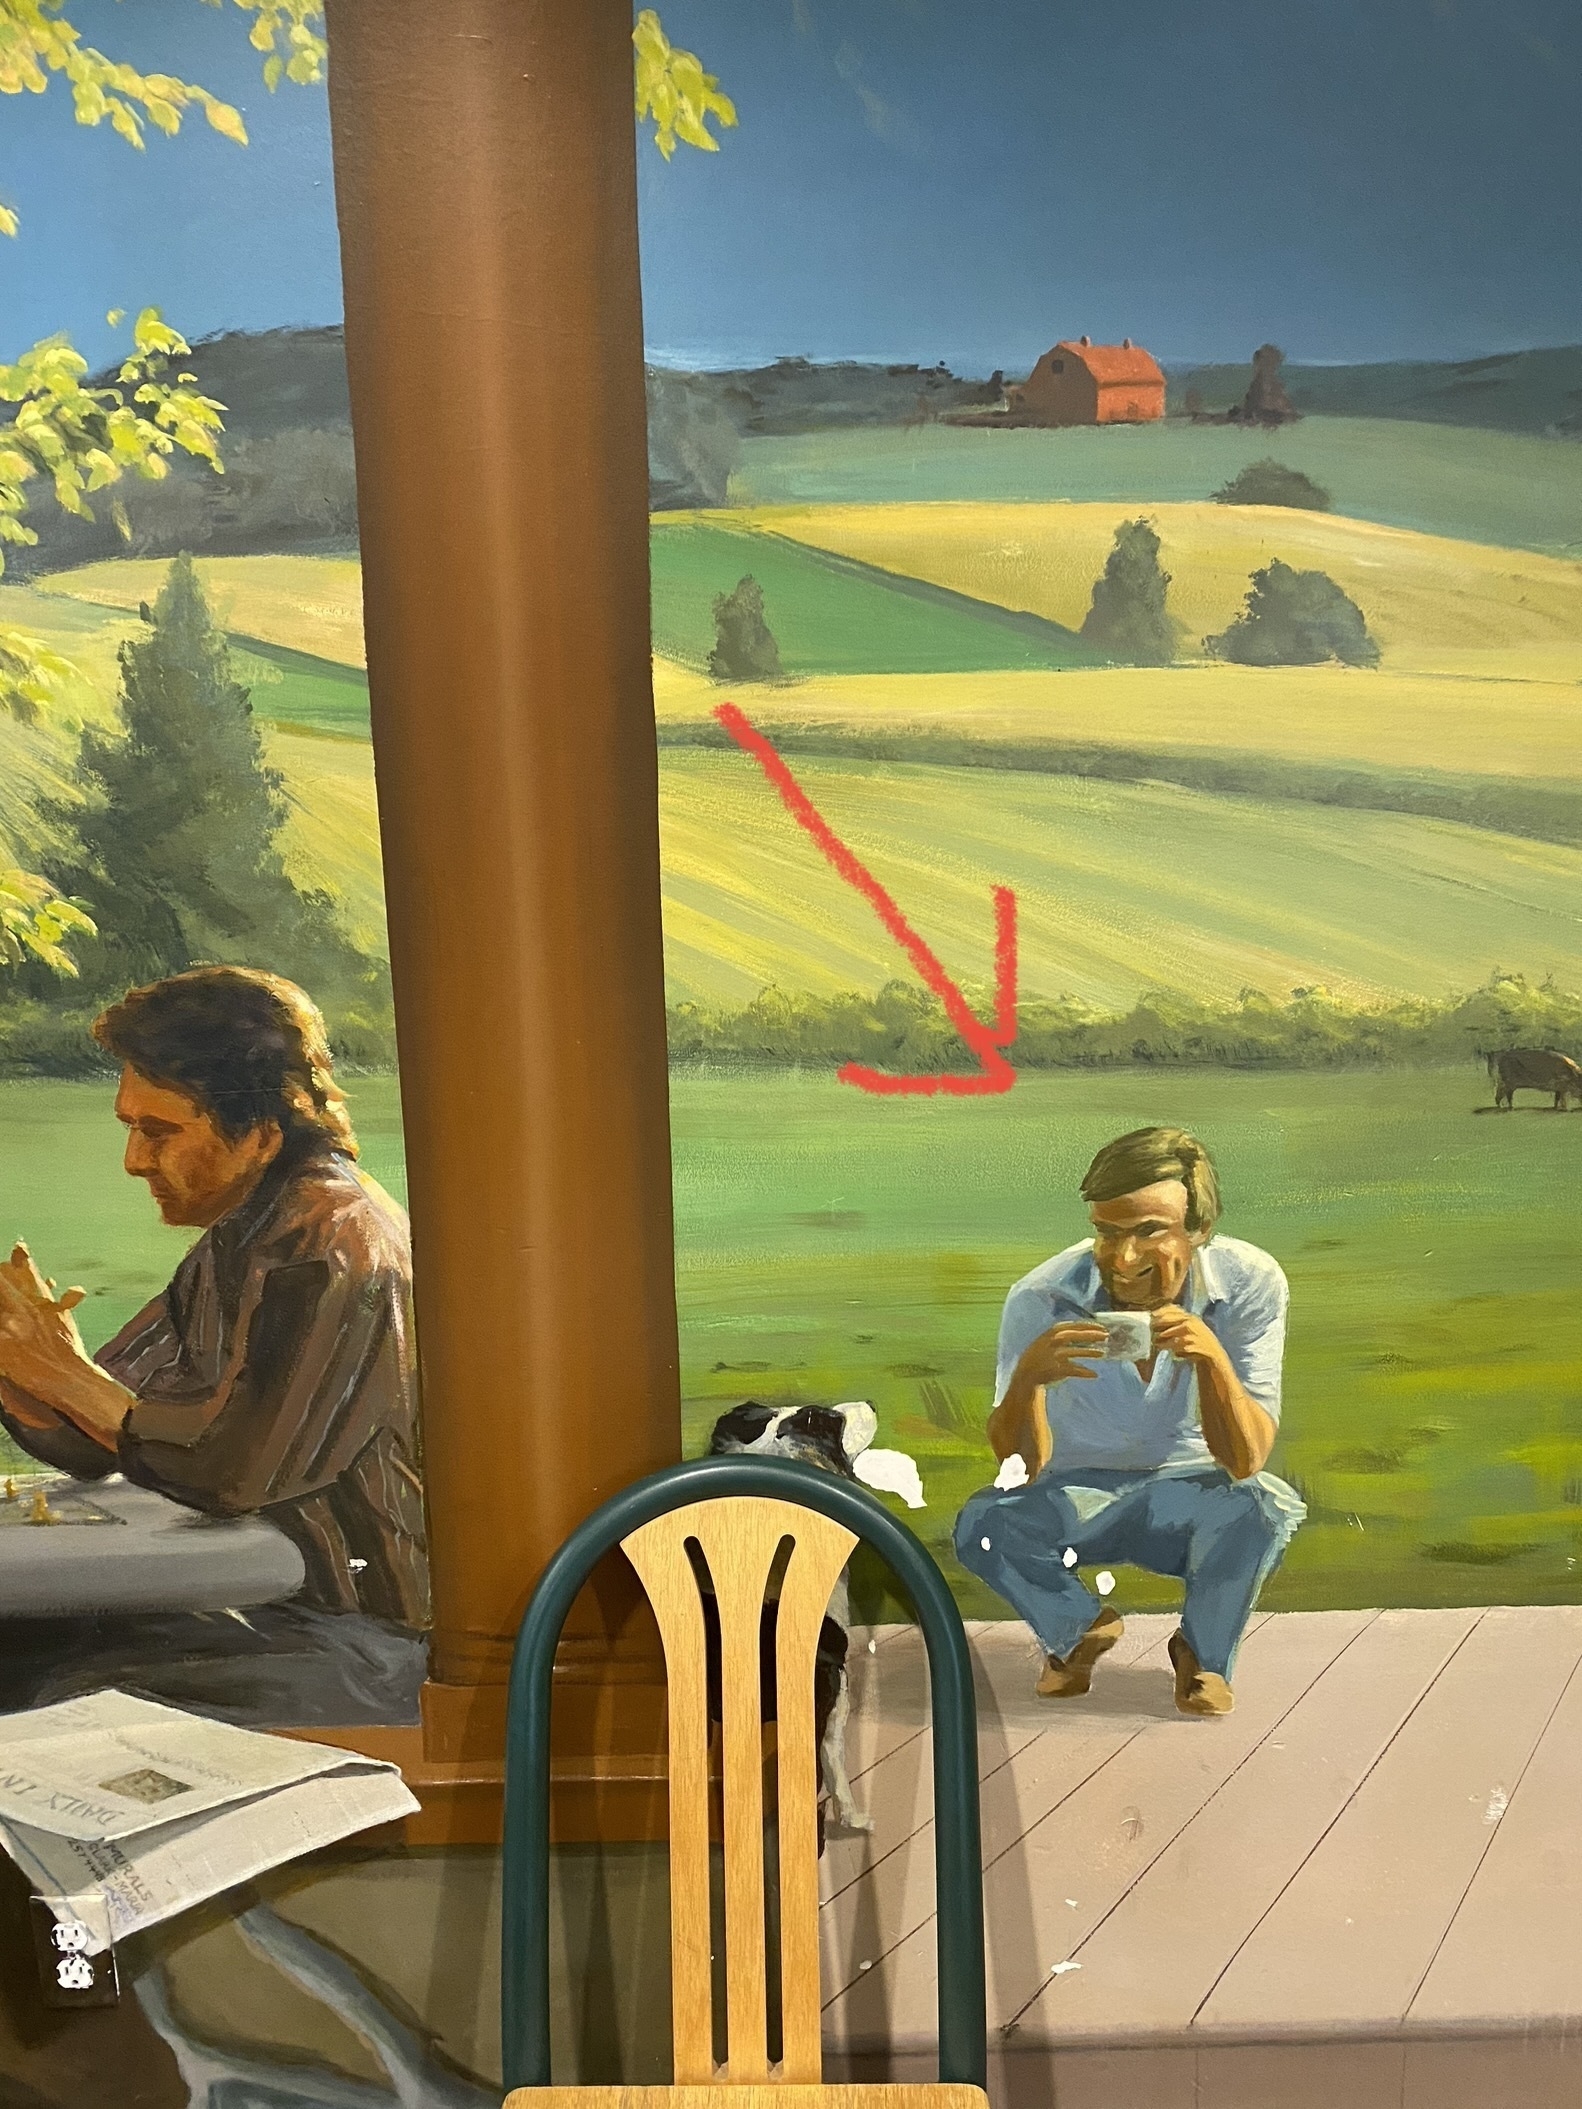 Wall sized airport mural in Kalispell that includes a creepy man kneeling, drinking coffee. His facial expression is frightening. 